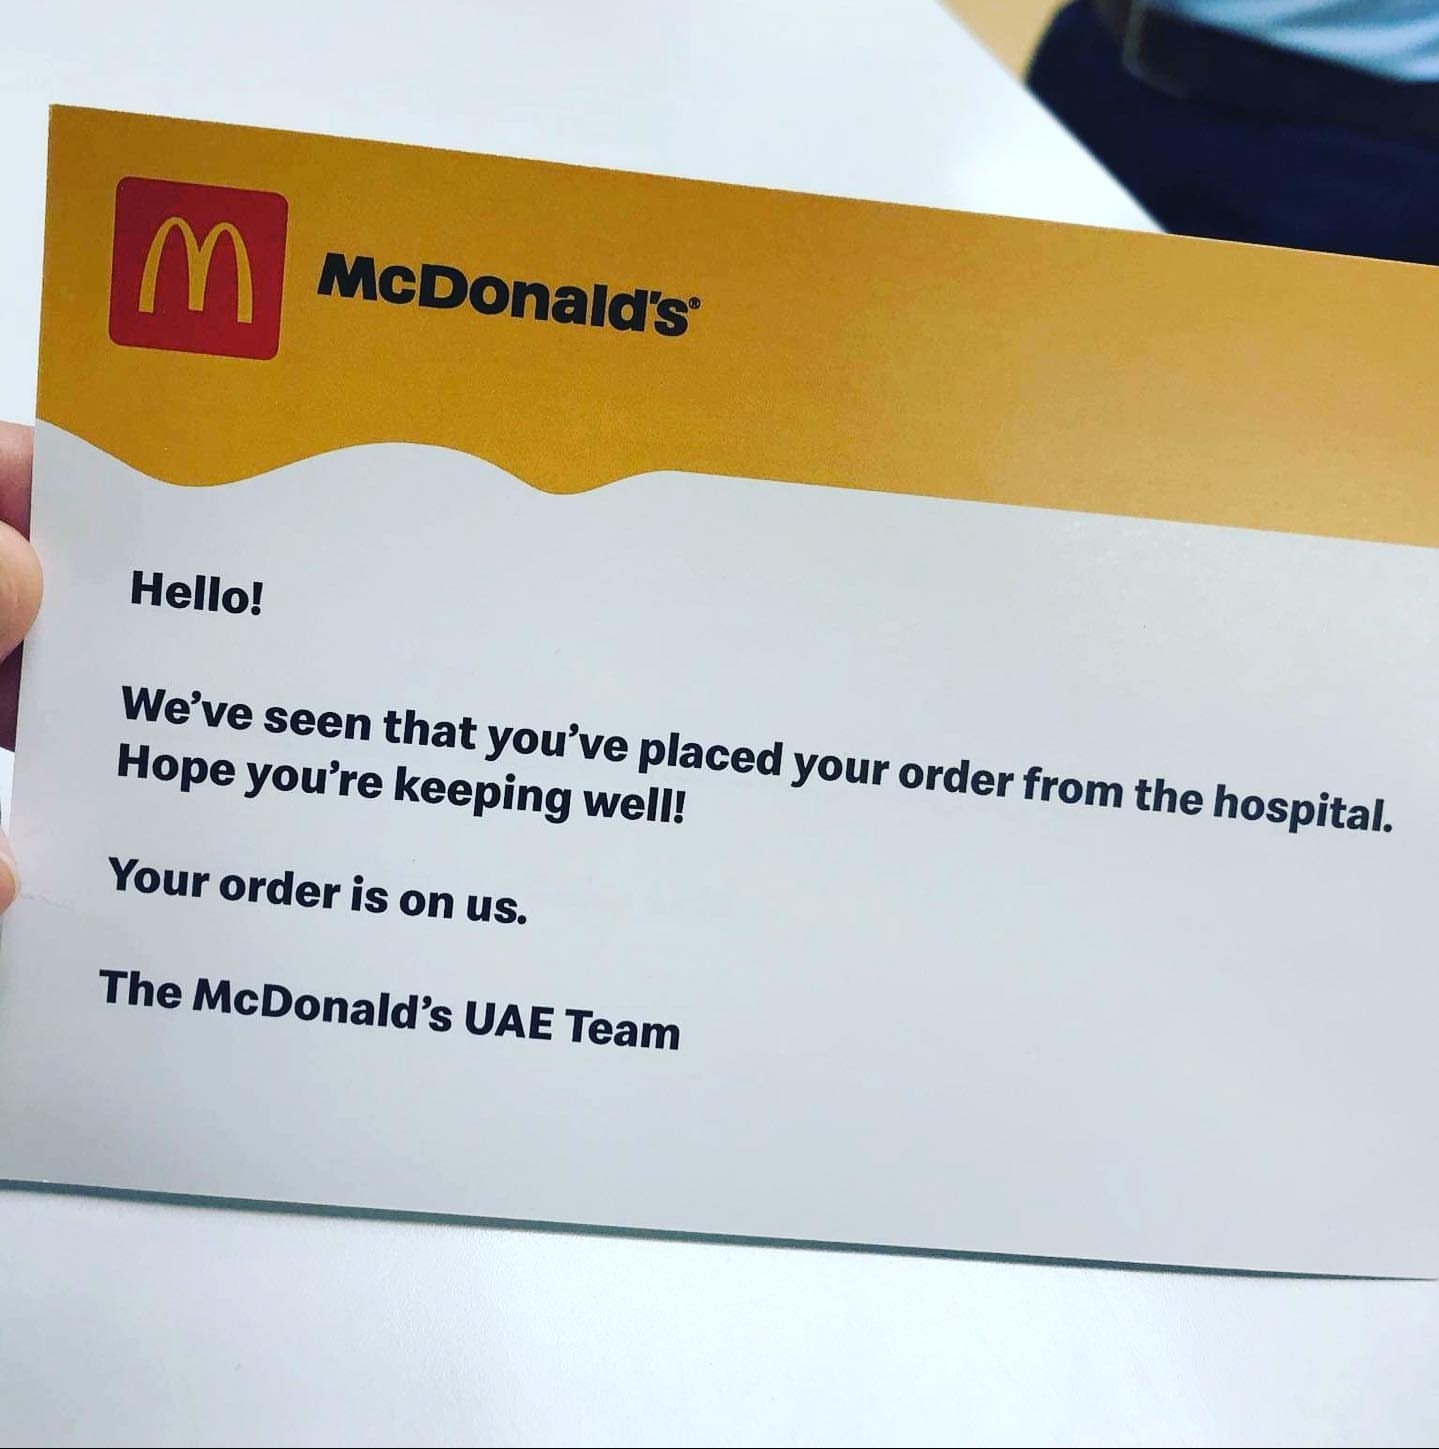 McDonald's paying for a nurse's order is pretty vv cool of them.